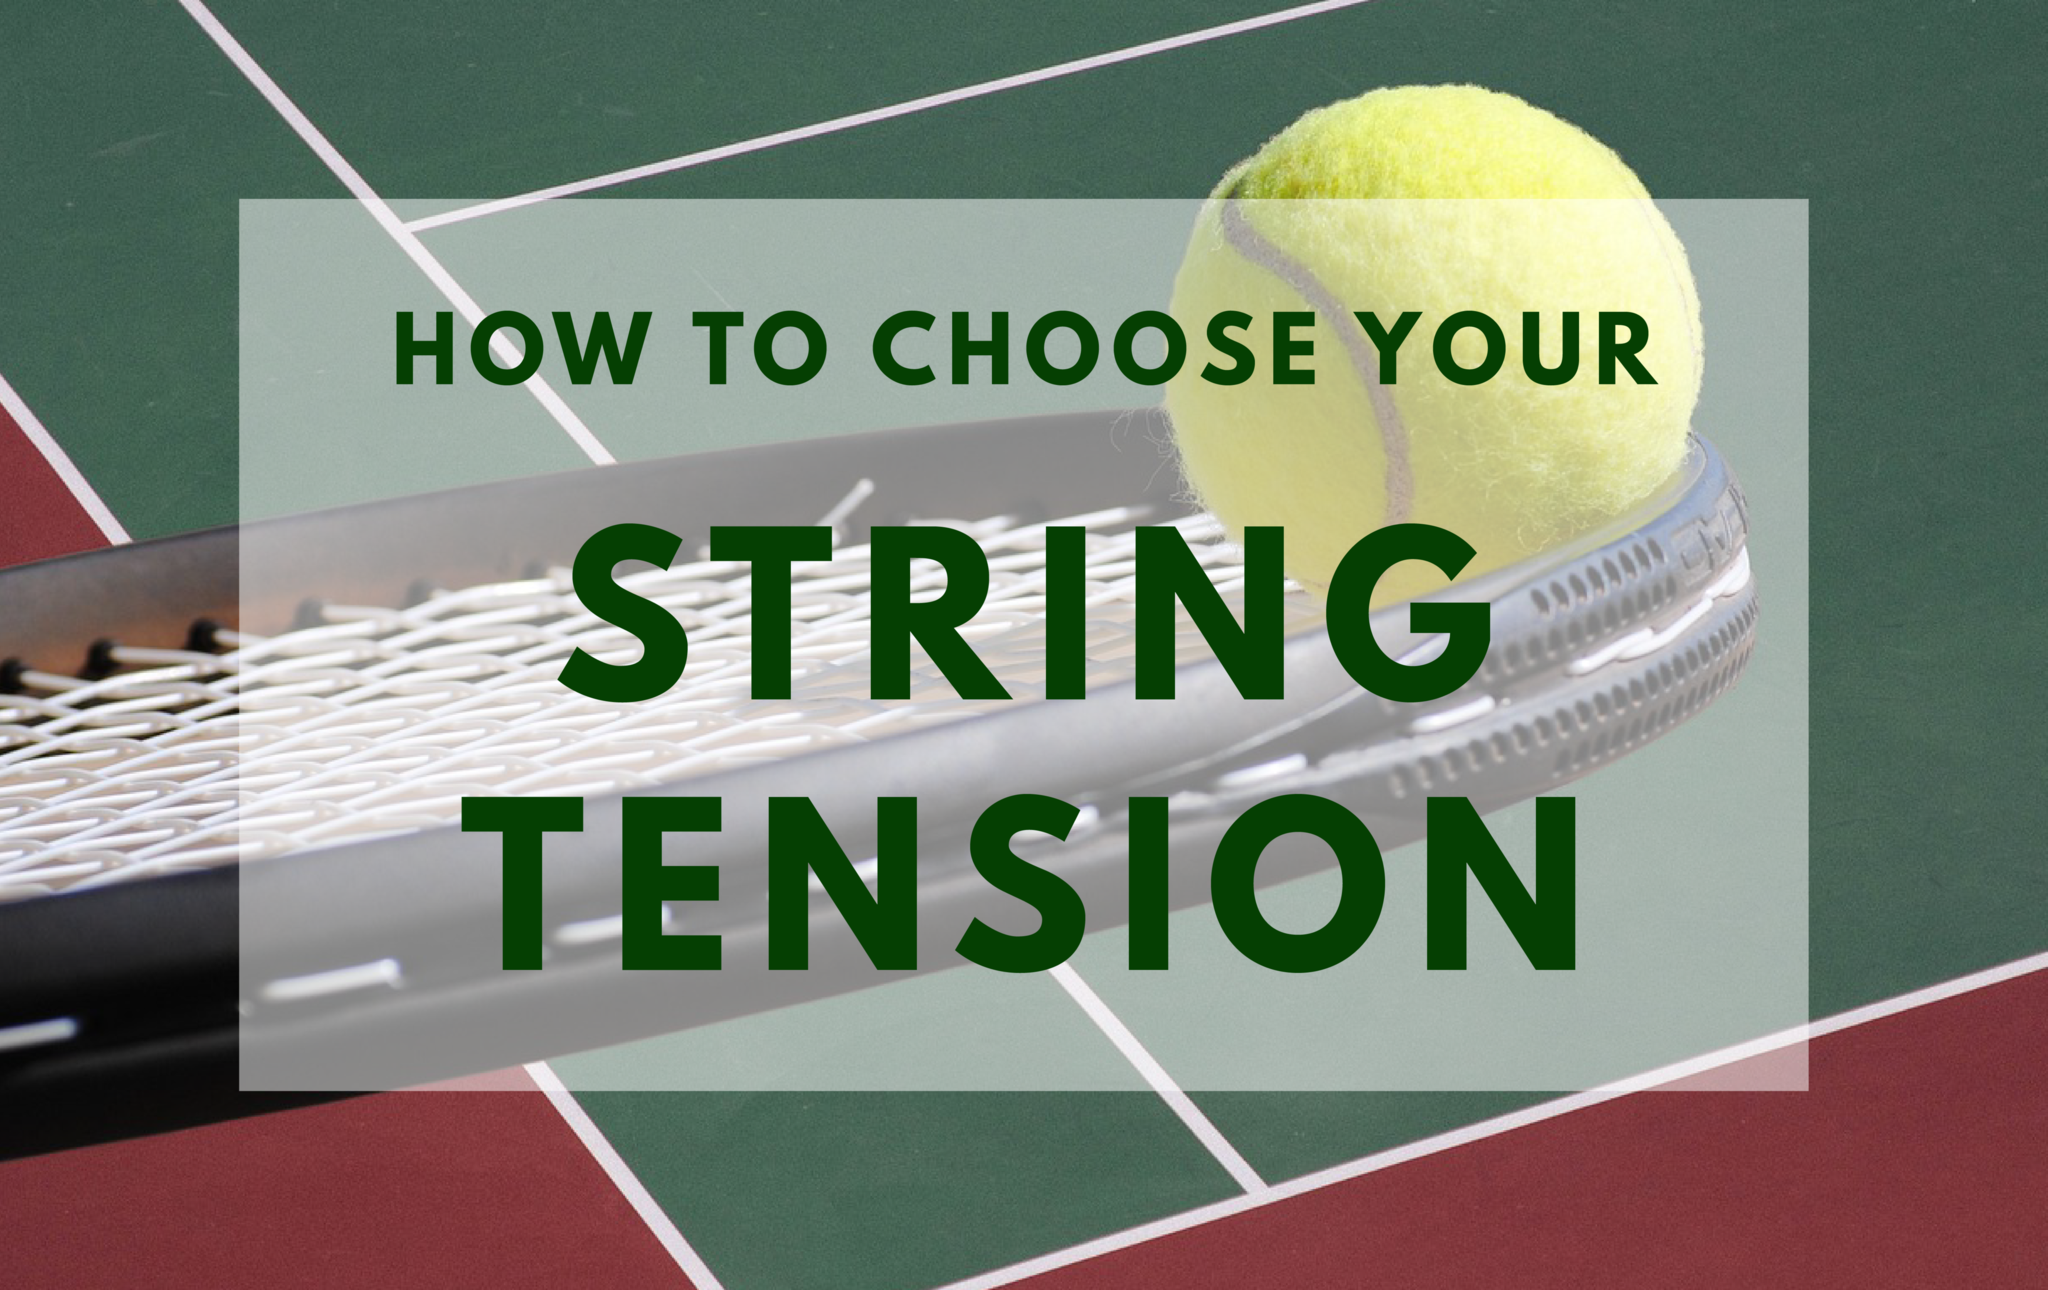 What String Tension Should I Use in My Tennis Racquet?